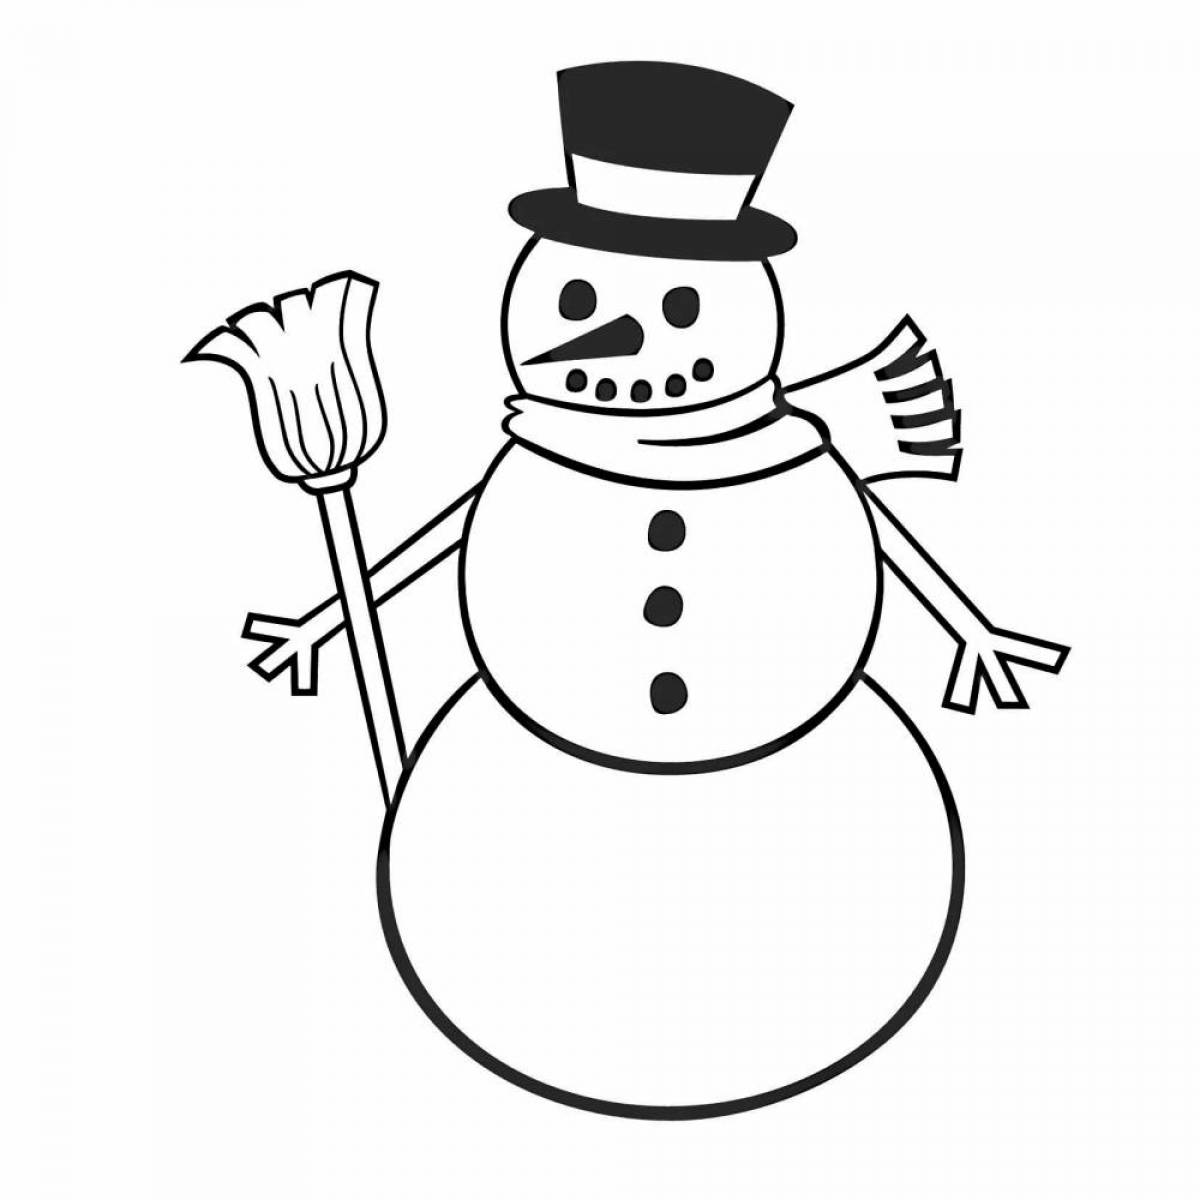 Magic snowman coloring page for kids